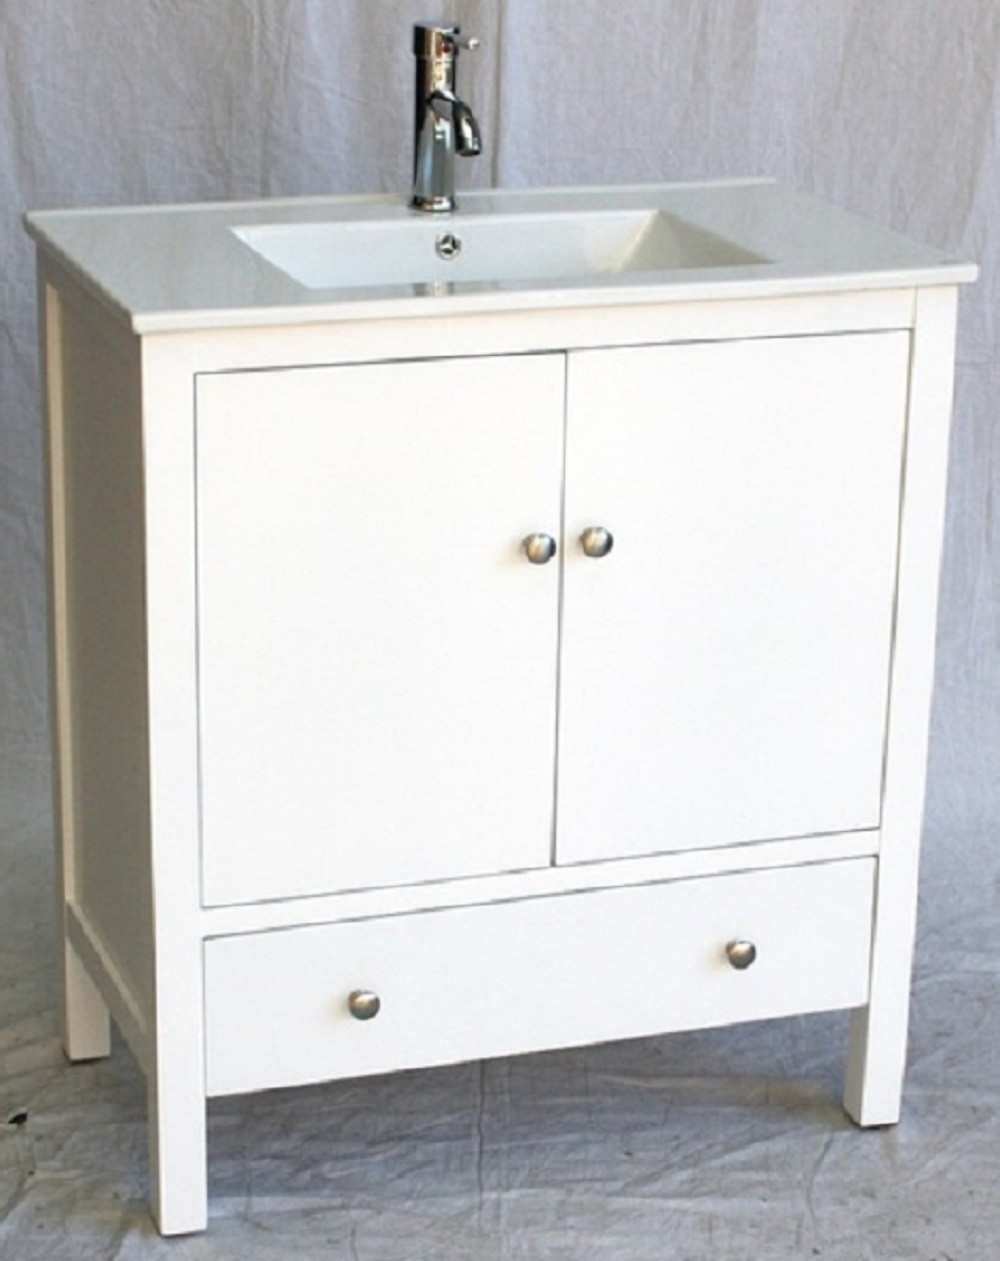 18 Inch Deep Bathroom Vanity
 32 inch 18 Deep Bathroom Vanity Modern Style White Color